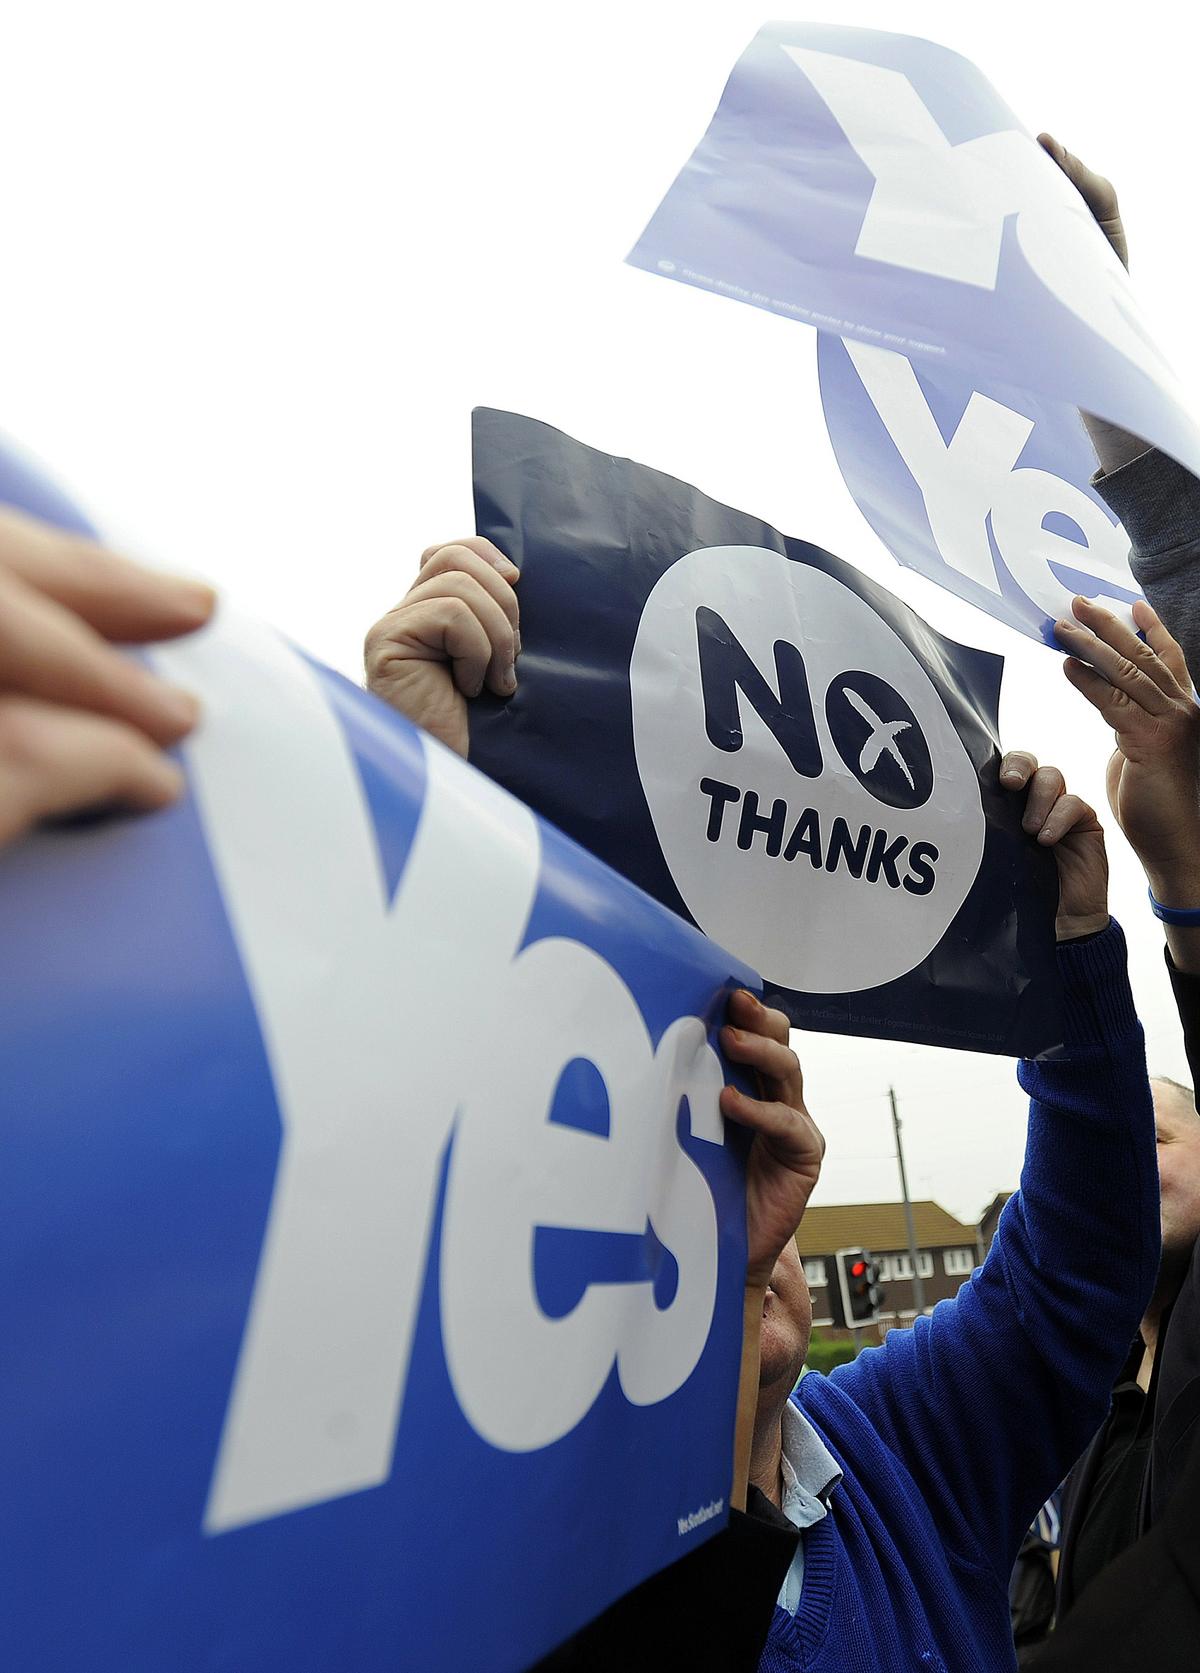 Pro-union and pro-independence campaigners jostle for space during a pro-independence rally by Scotland's Deputy First Minister Nicola Sturgeon in Glasgow, Scotland, on Sept. 12, 2014, ahead of the referendum on Scotland's independence. (Andy Buchanan/AFP/Getty Images)